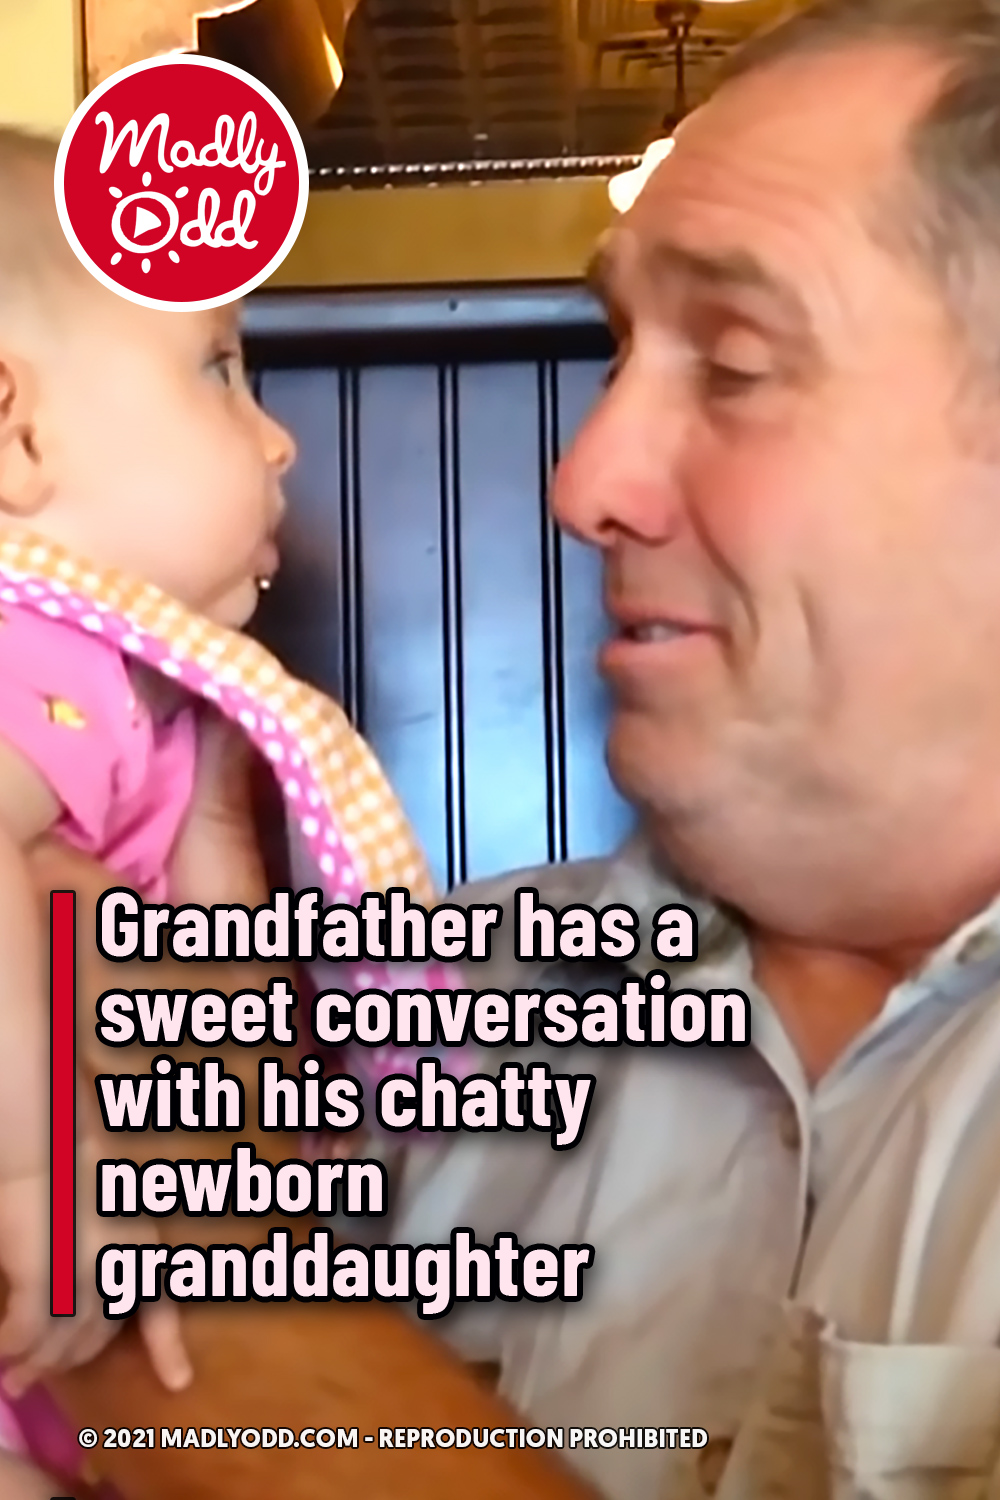 Grandfather has a sweet conversation with his chatty newborn granddaughter